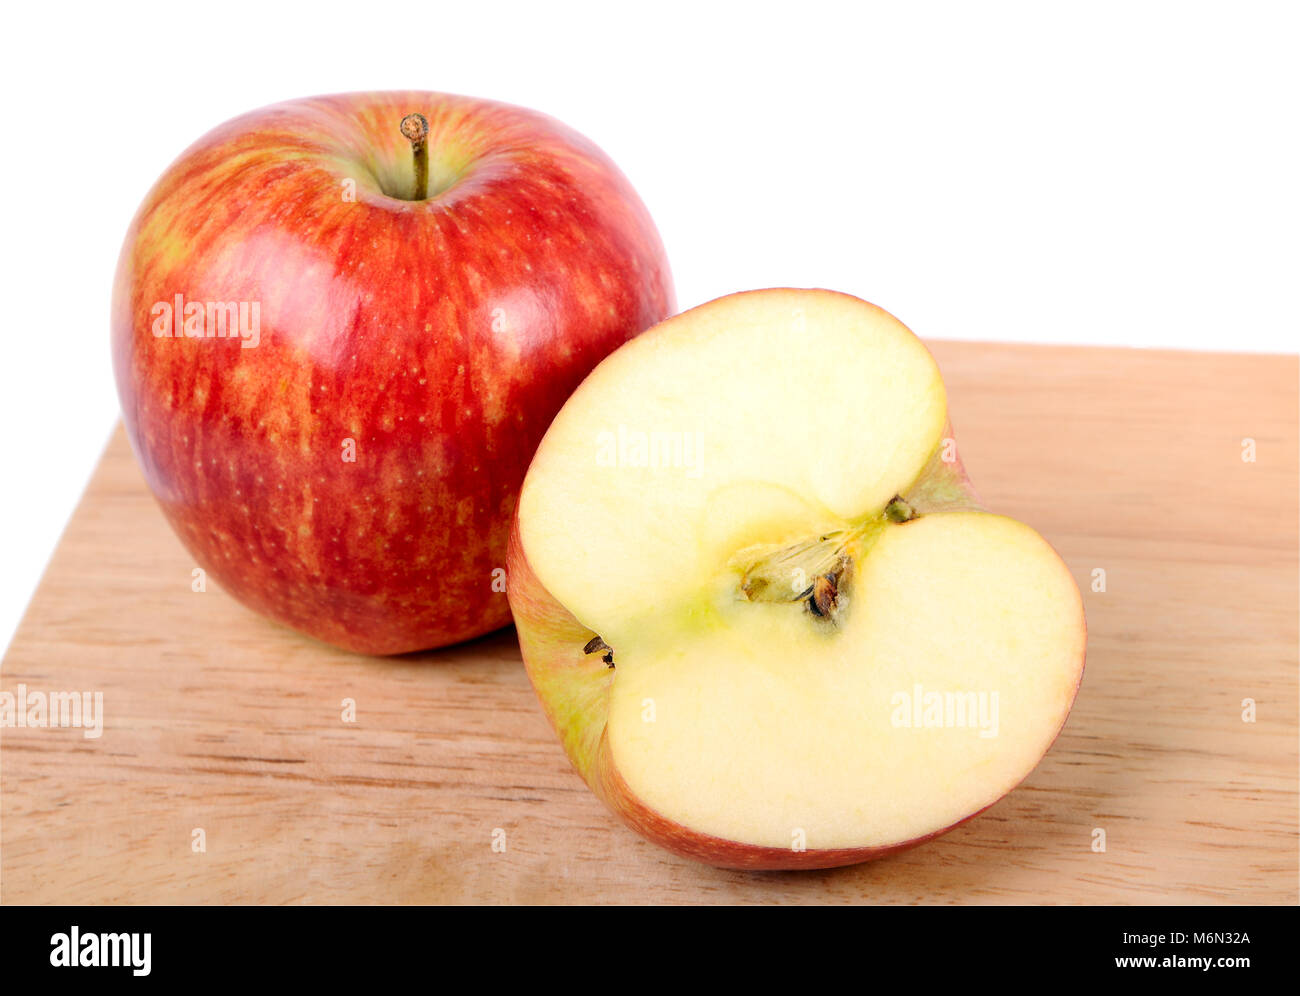 One and a half apple on wood cutting board Stock Photo